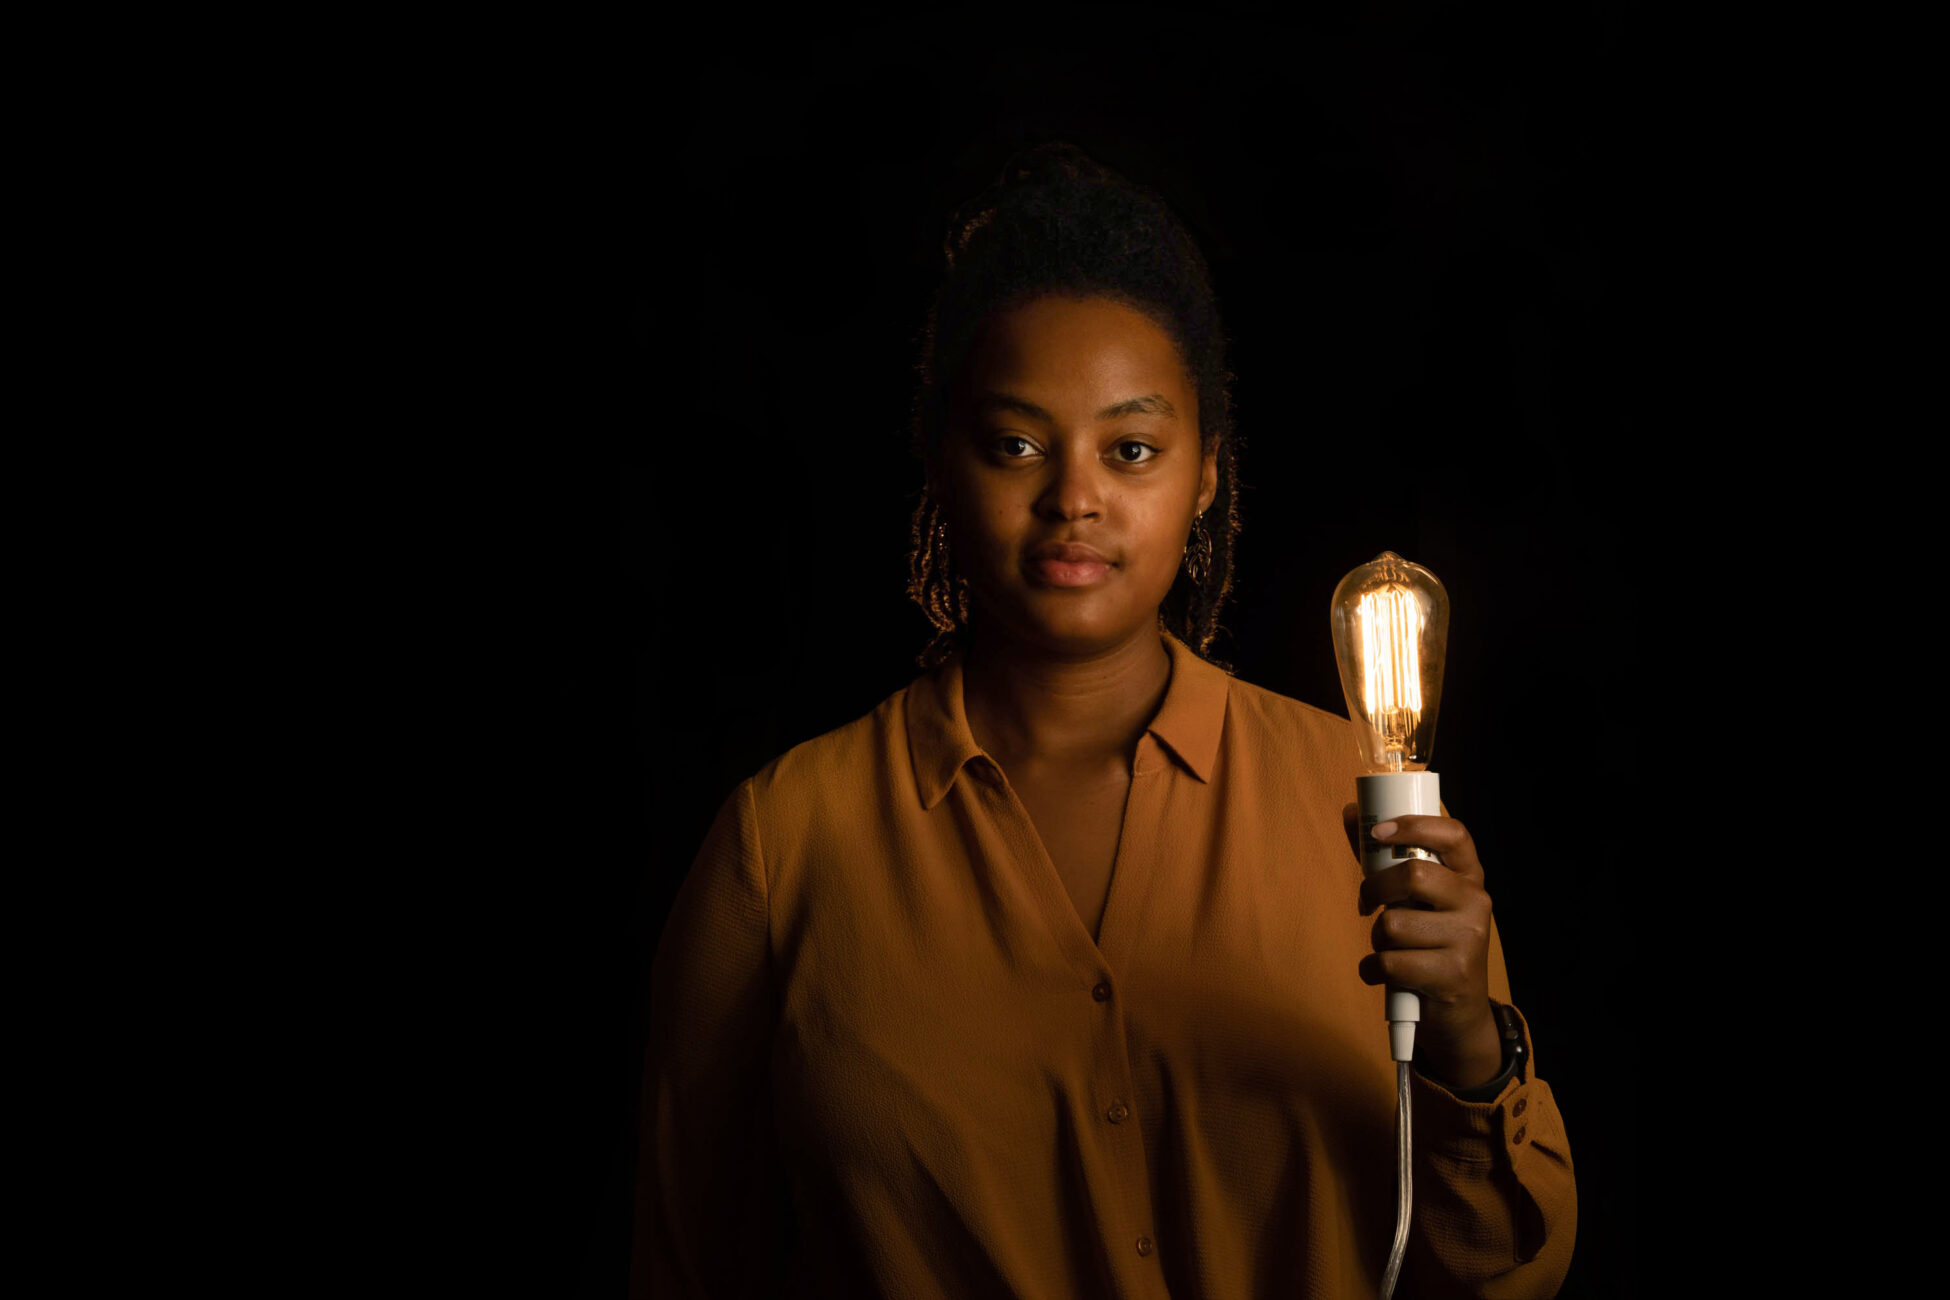 Lenore Hango holds a lighted flashbulb in the darkness around her.